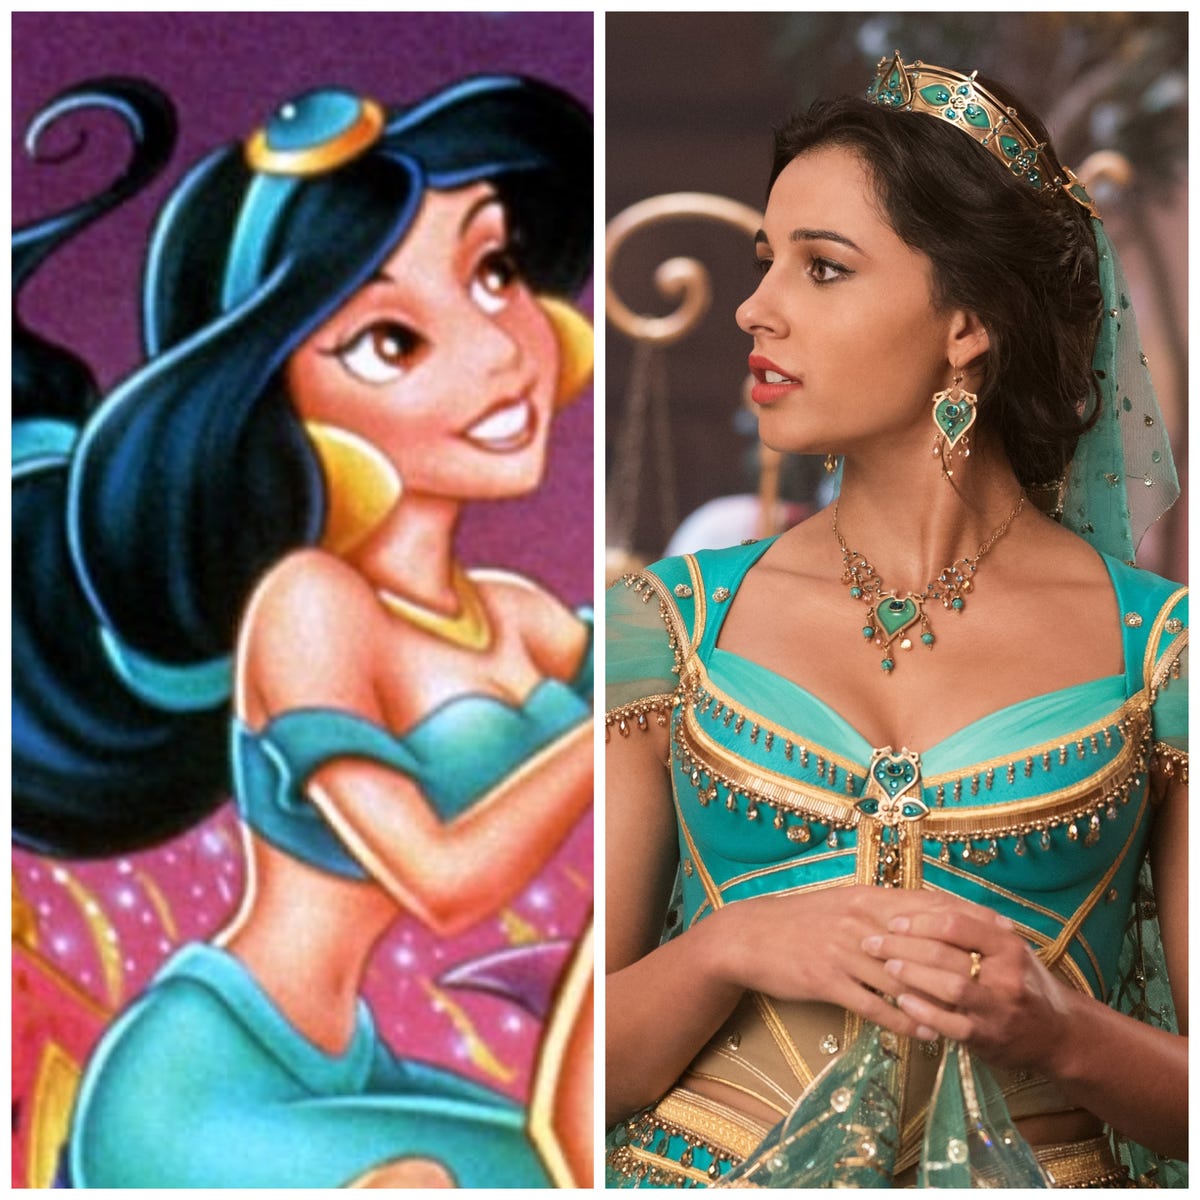 filosoof R Monografie Aladdin's new outfits: Why Jasmine doesn't bare her midriff this time